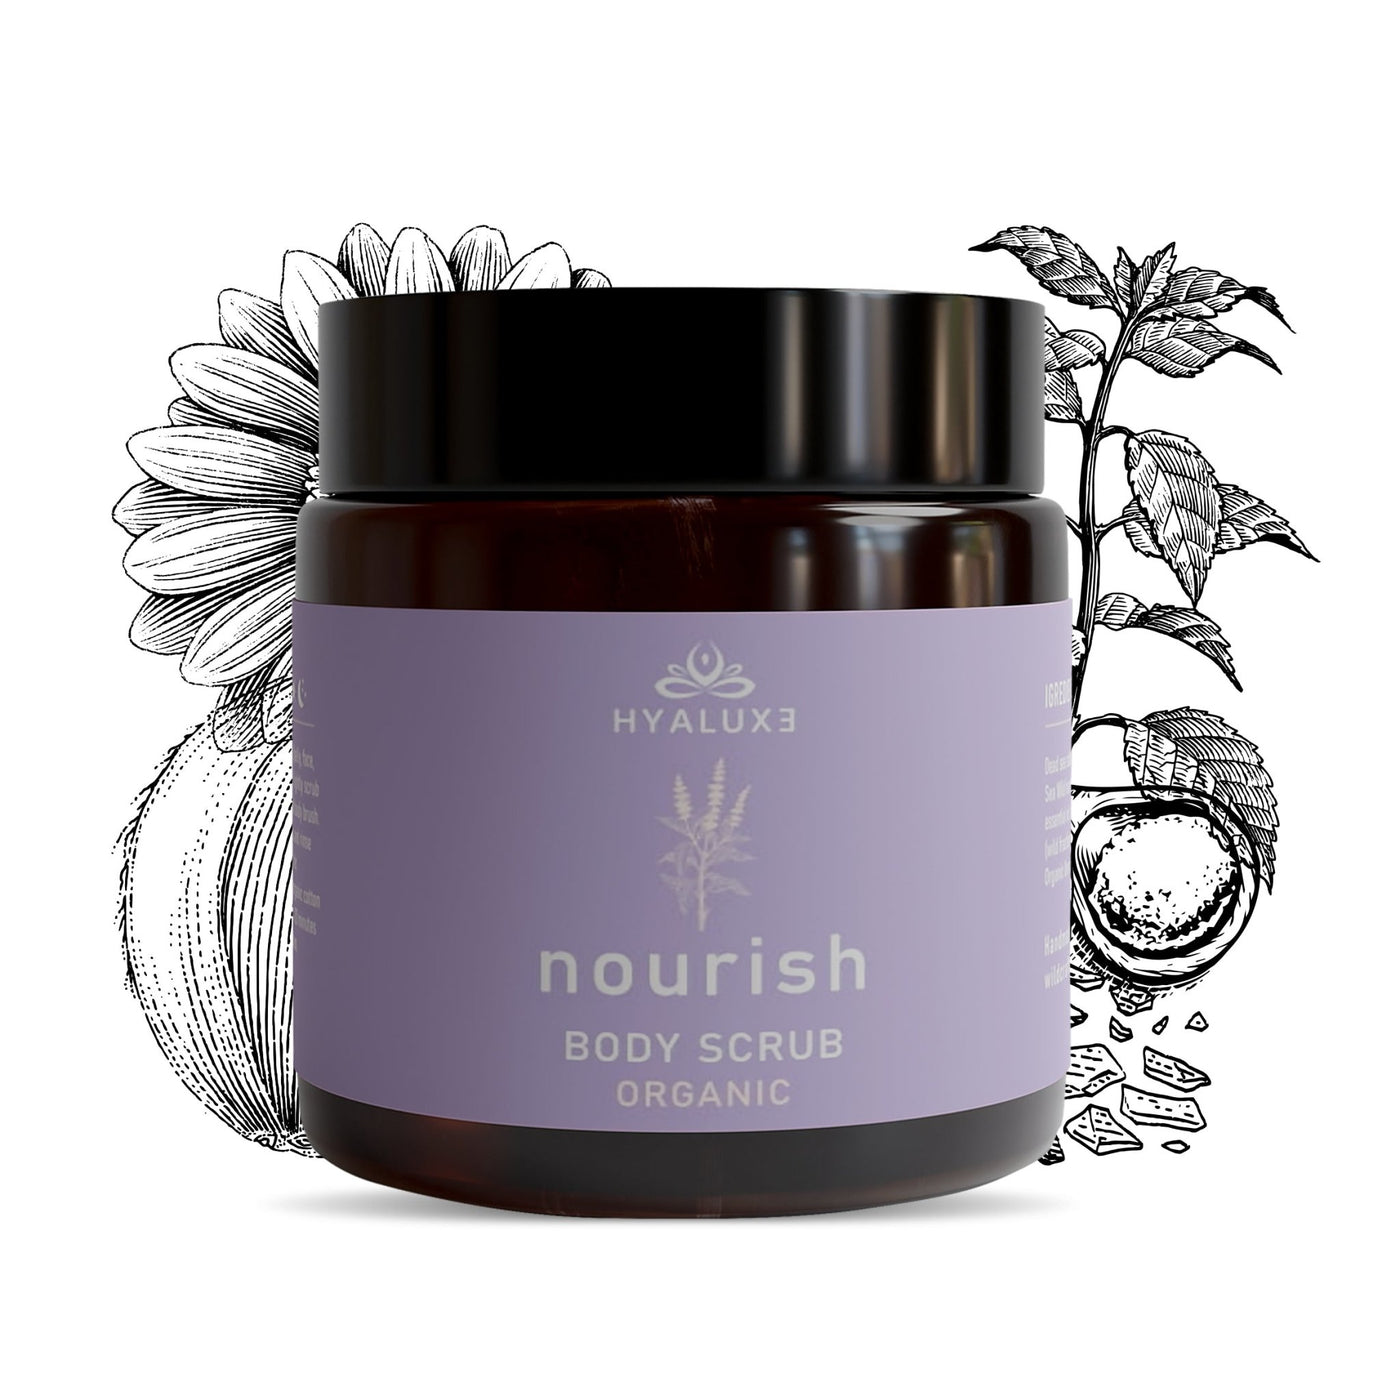 Sea Scrub : Skin Soothing, perfecting and Replenishment Scrub with Body Brush - Hyaluxe Body